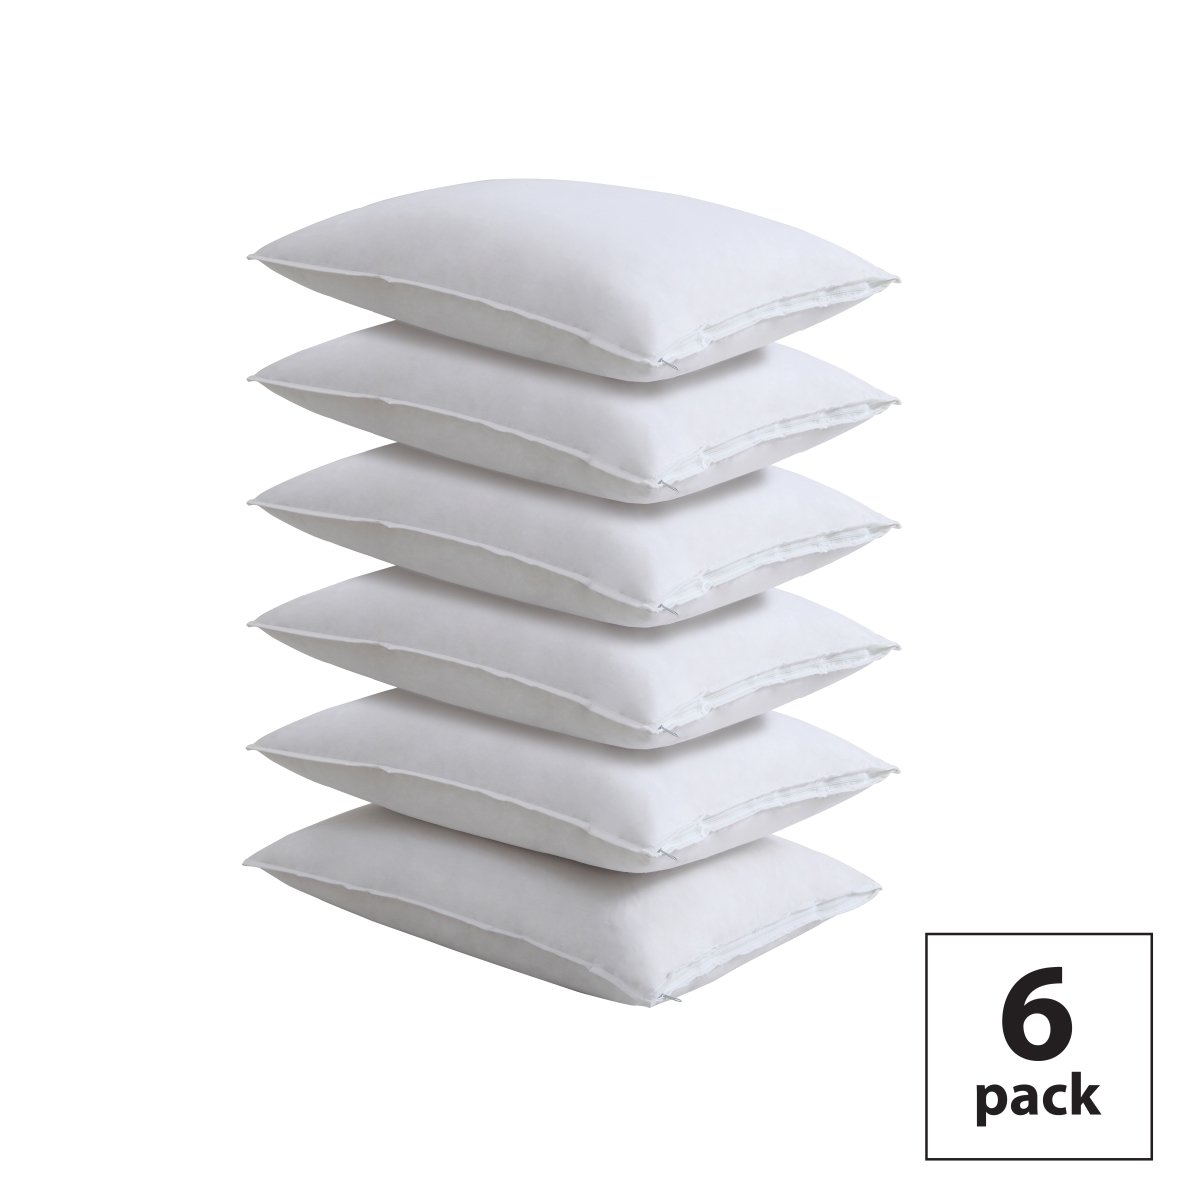 Fre10306whit09 Allergy Relief Pillow Protector Set, King Size - Pack Of 6